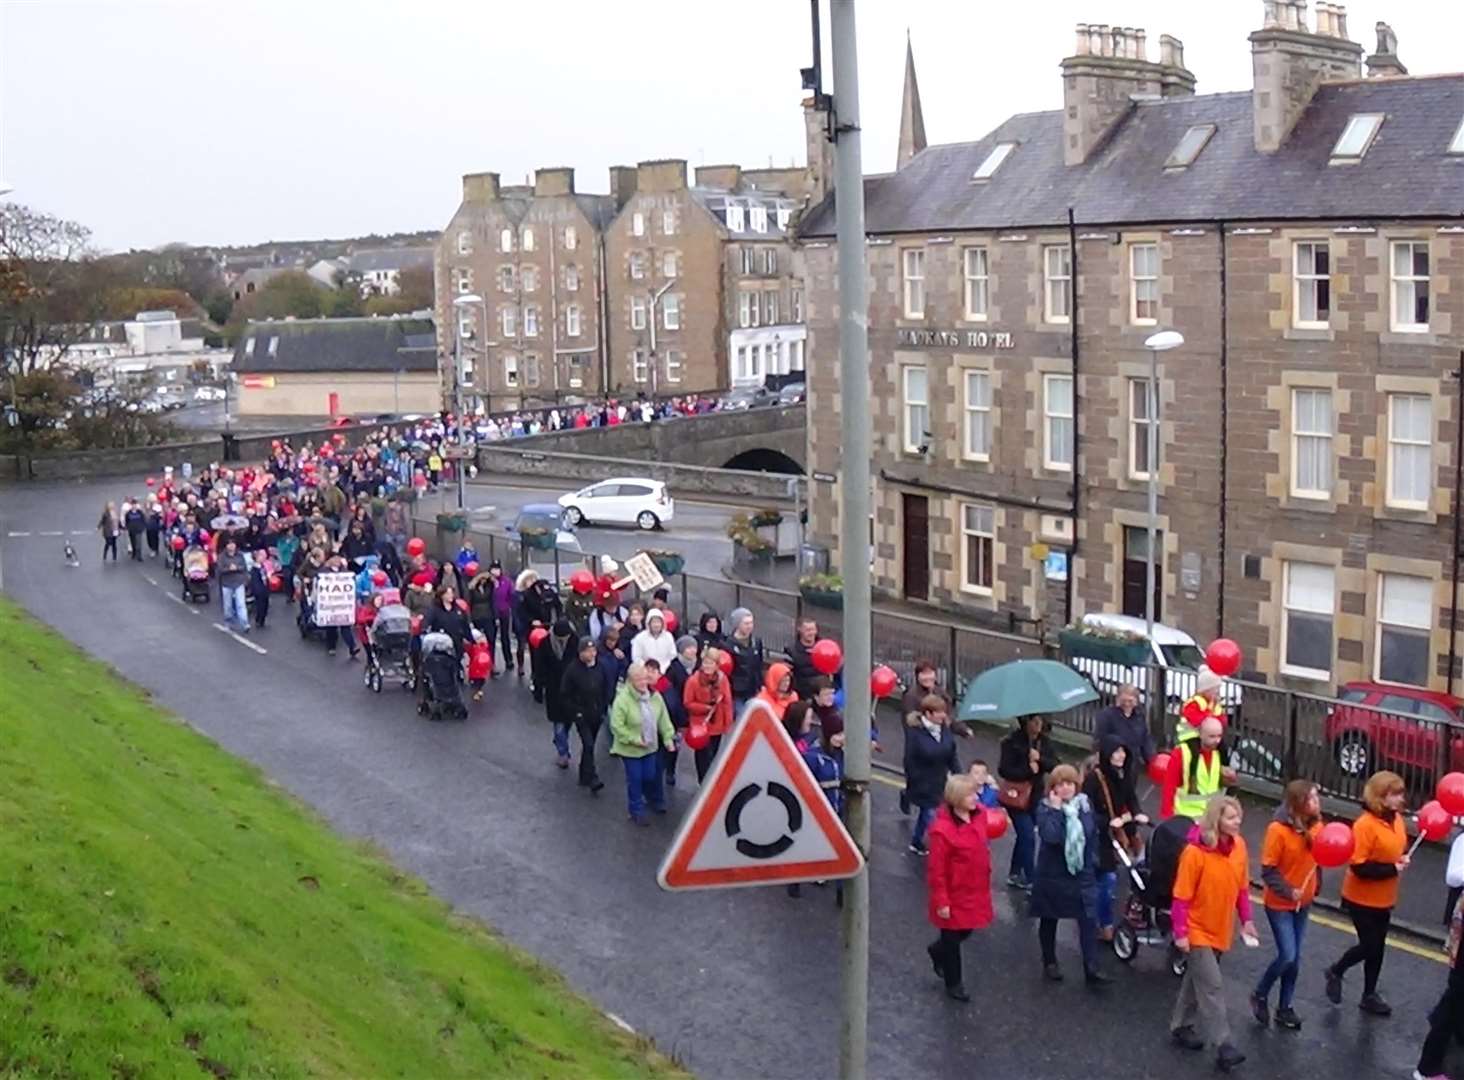 An estimated 500 people took part in the final mile of the protest. Photo: Will Clark